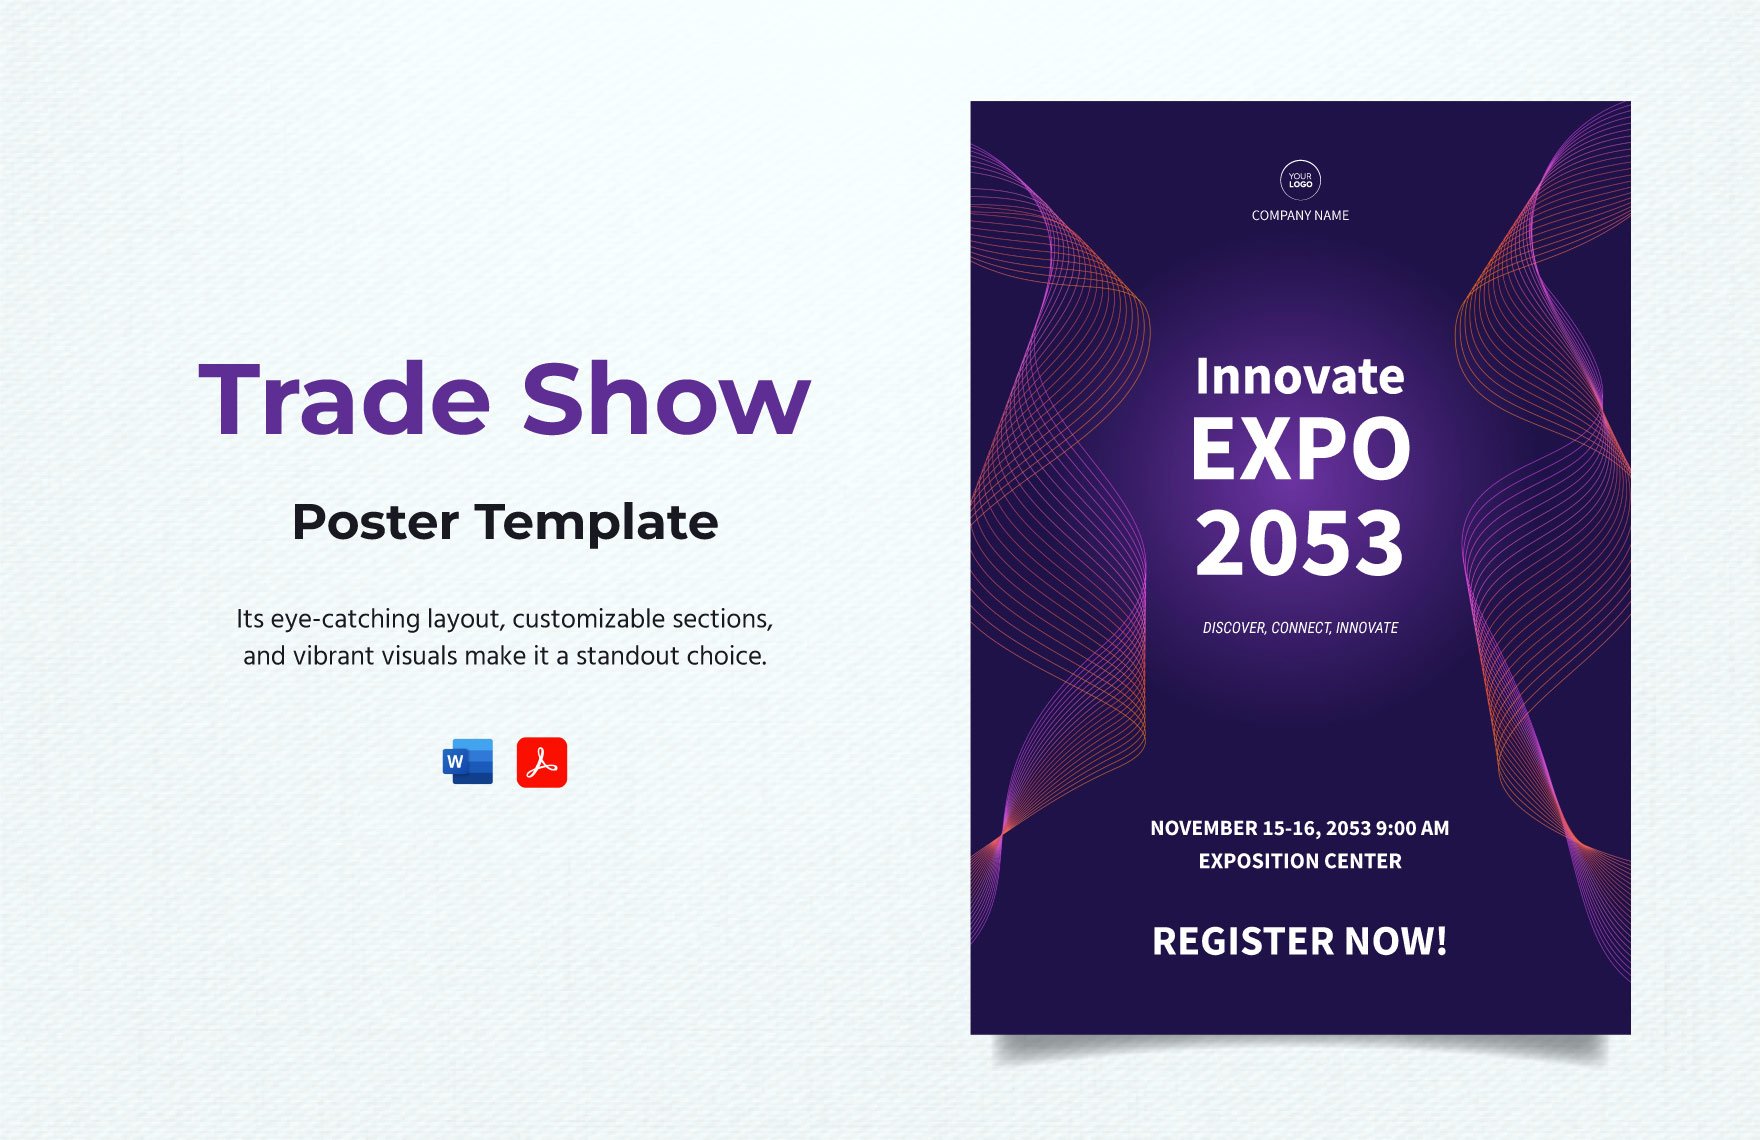 Trade Show Poster Template